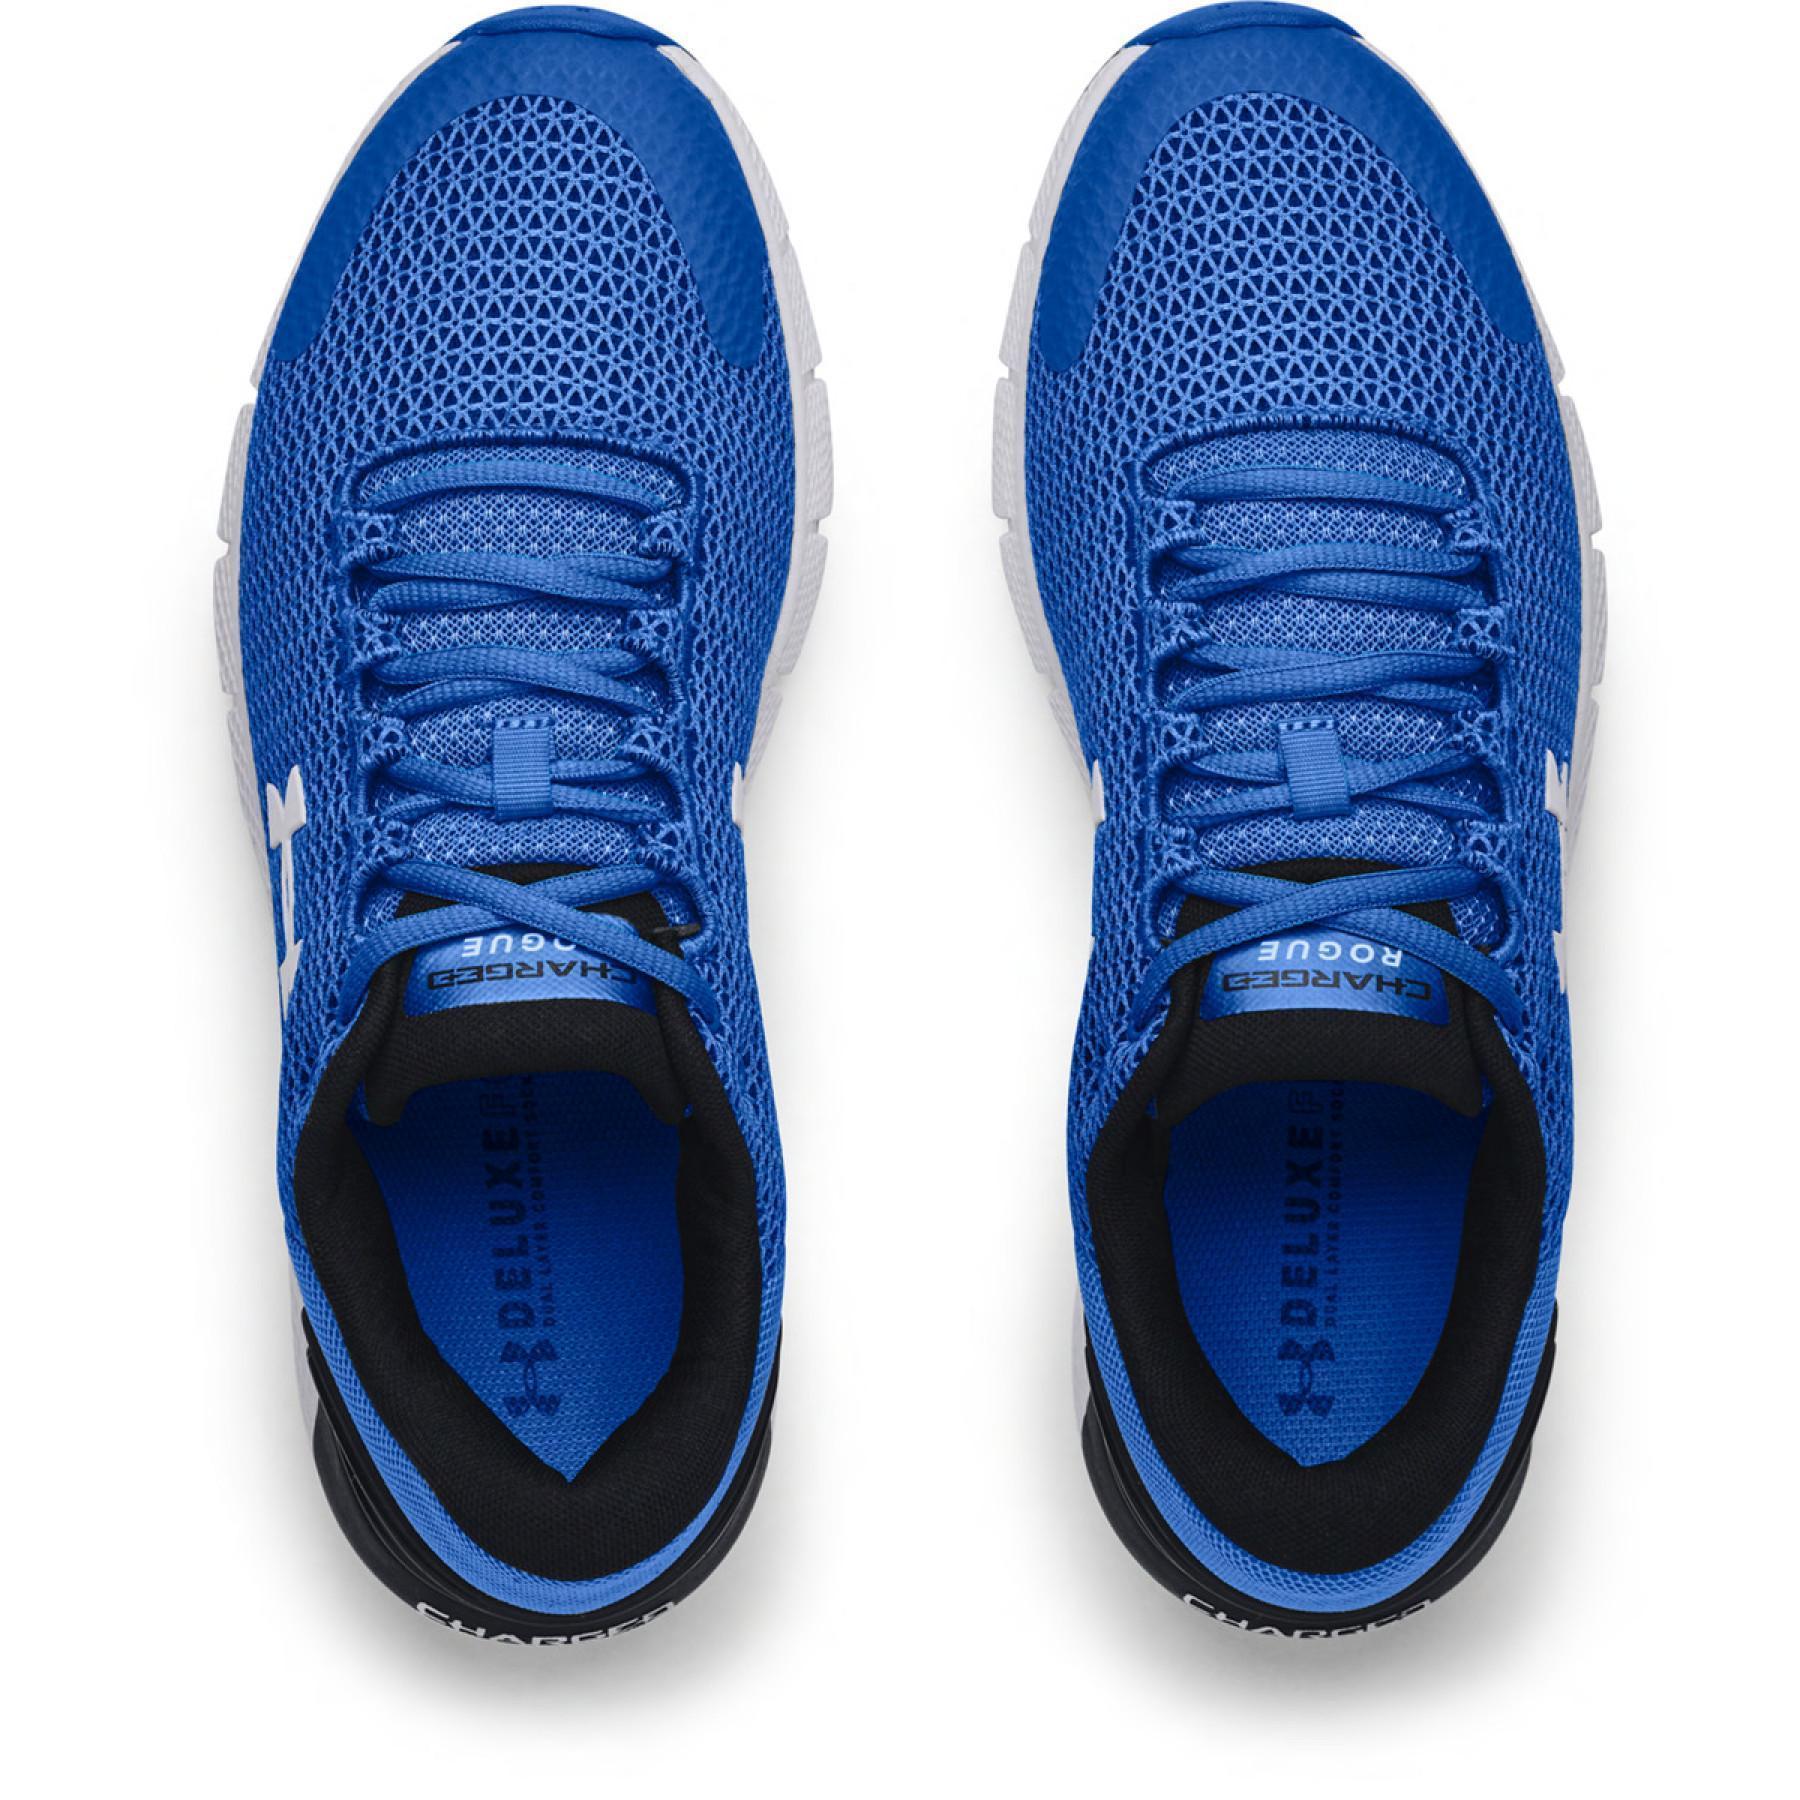 Running shoes Under Armour Charged Rogue 2.5